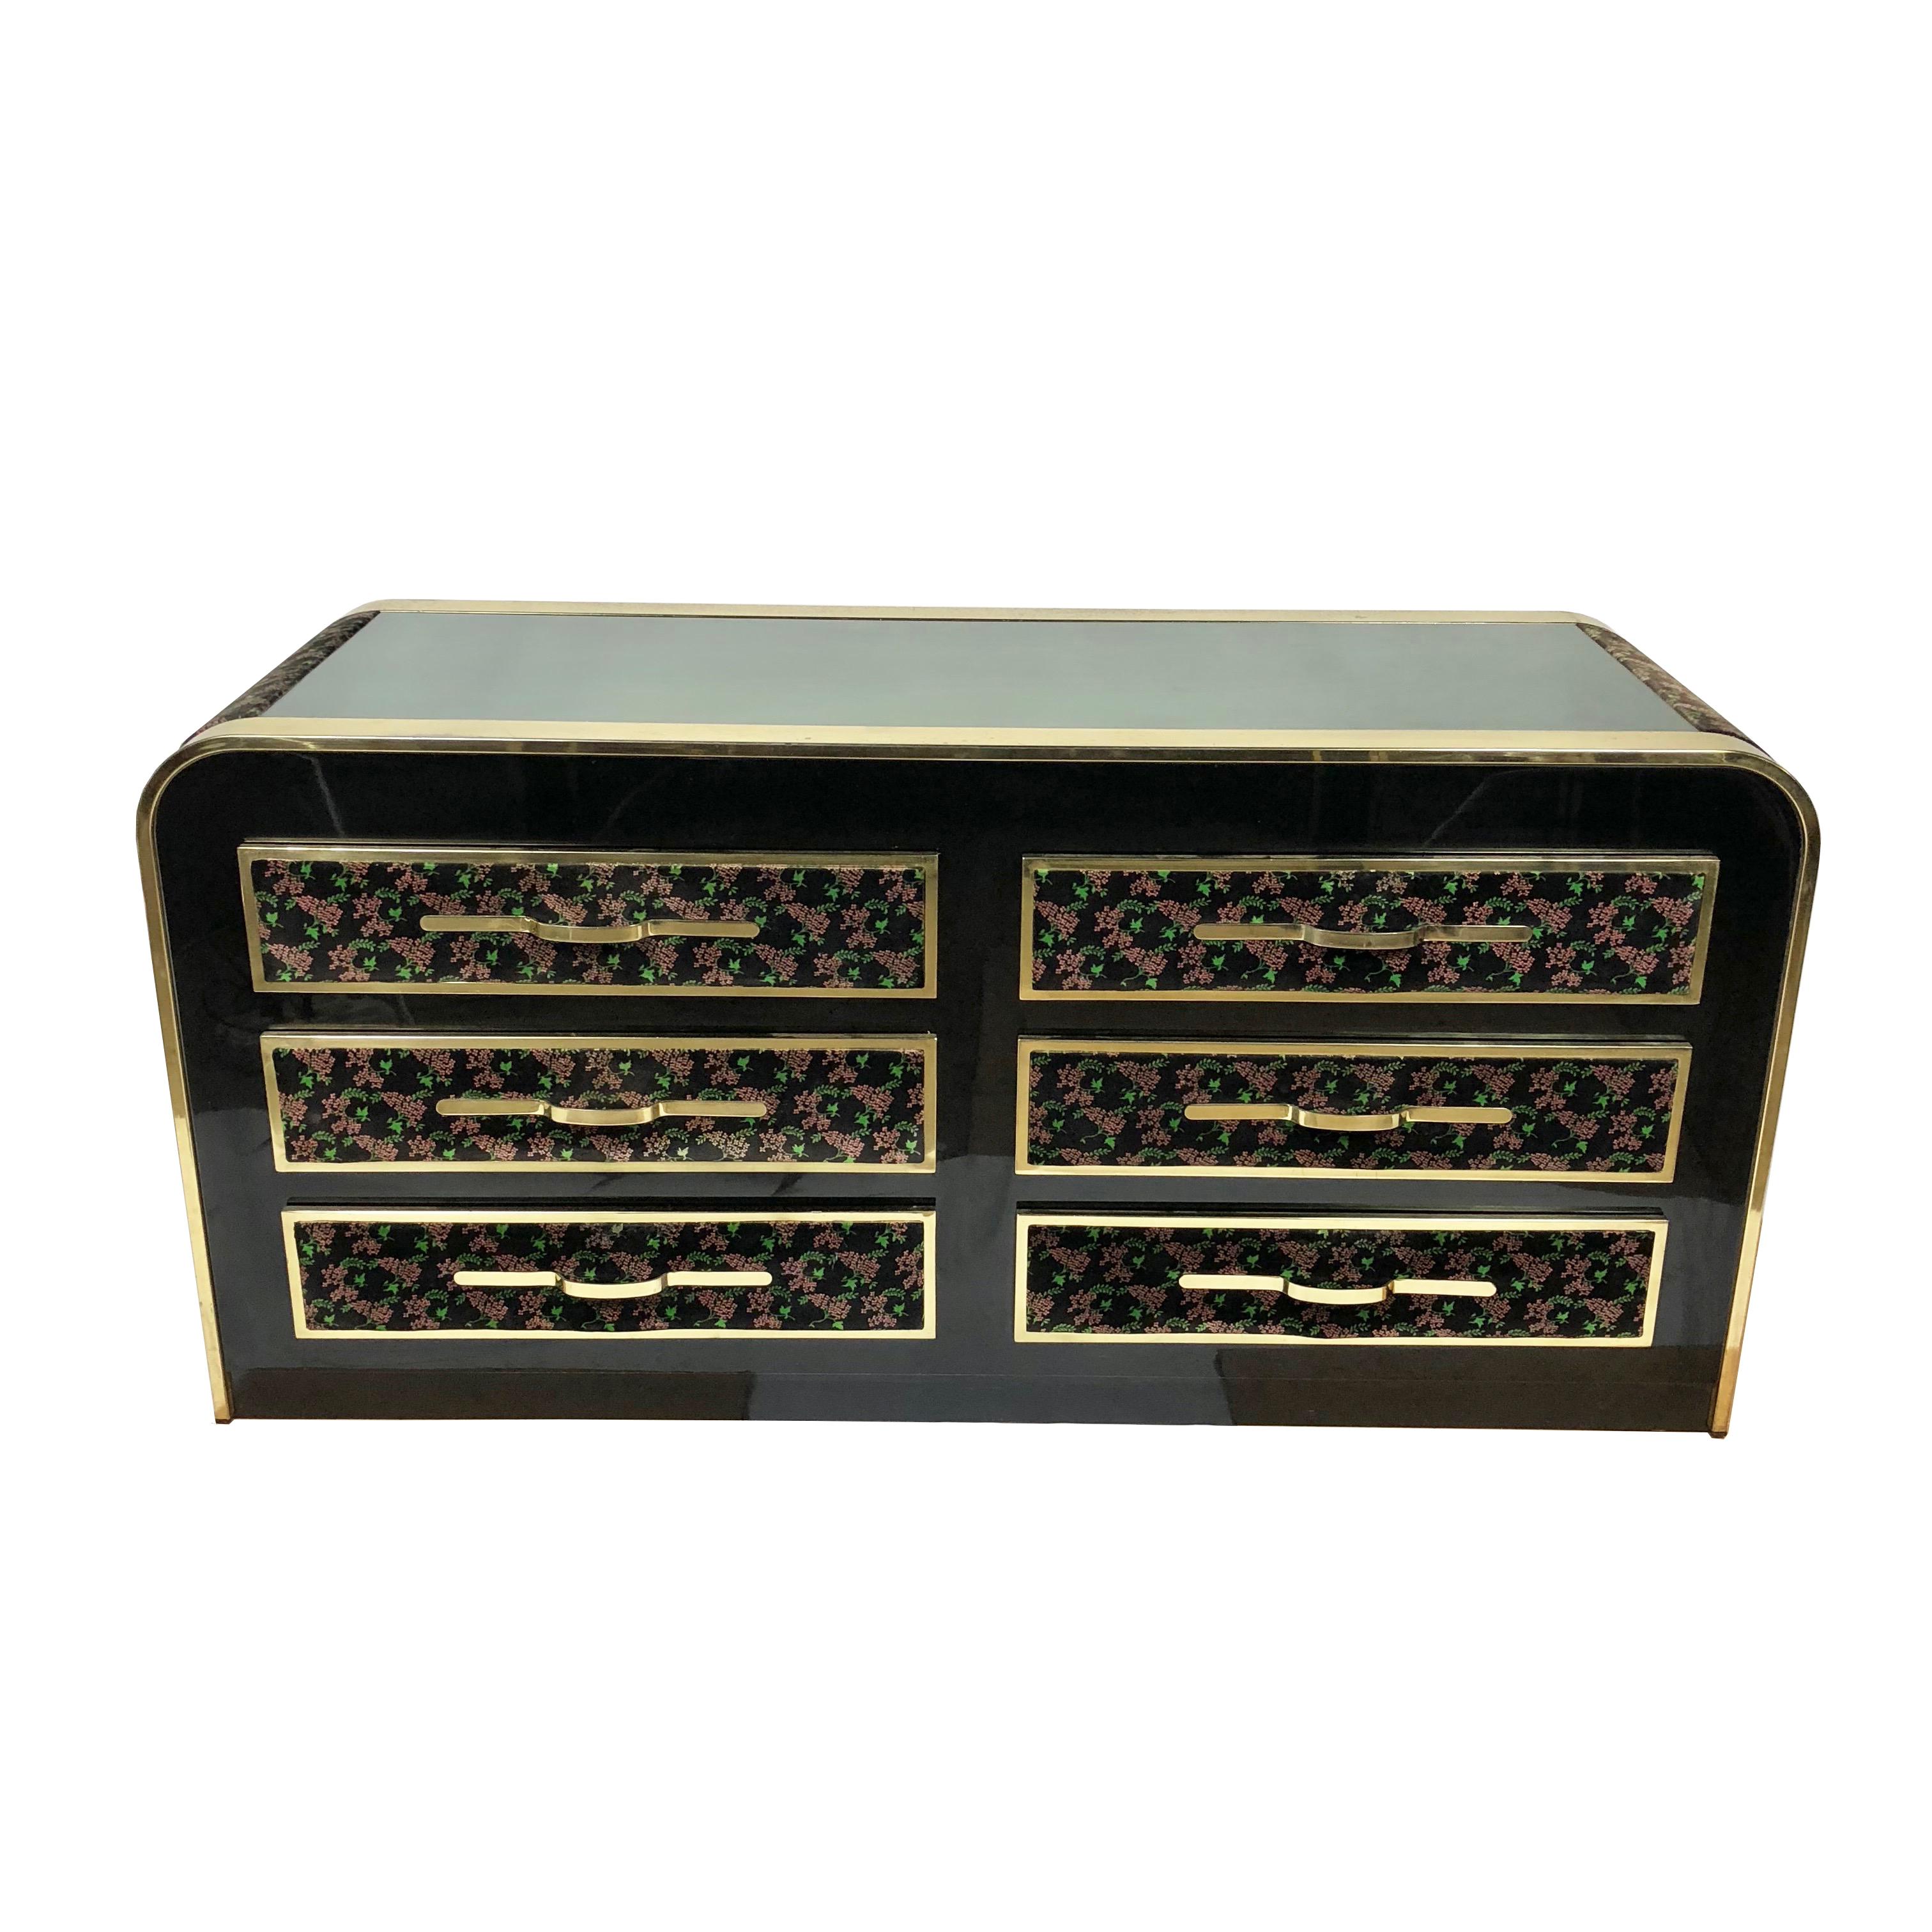 Rare piece of the Italian Romeo Rega dresser in brass and glass (upper part) covered with velvet. The velvet has a floral theme: pink flowers with a green leaf each.